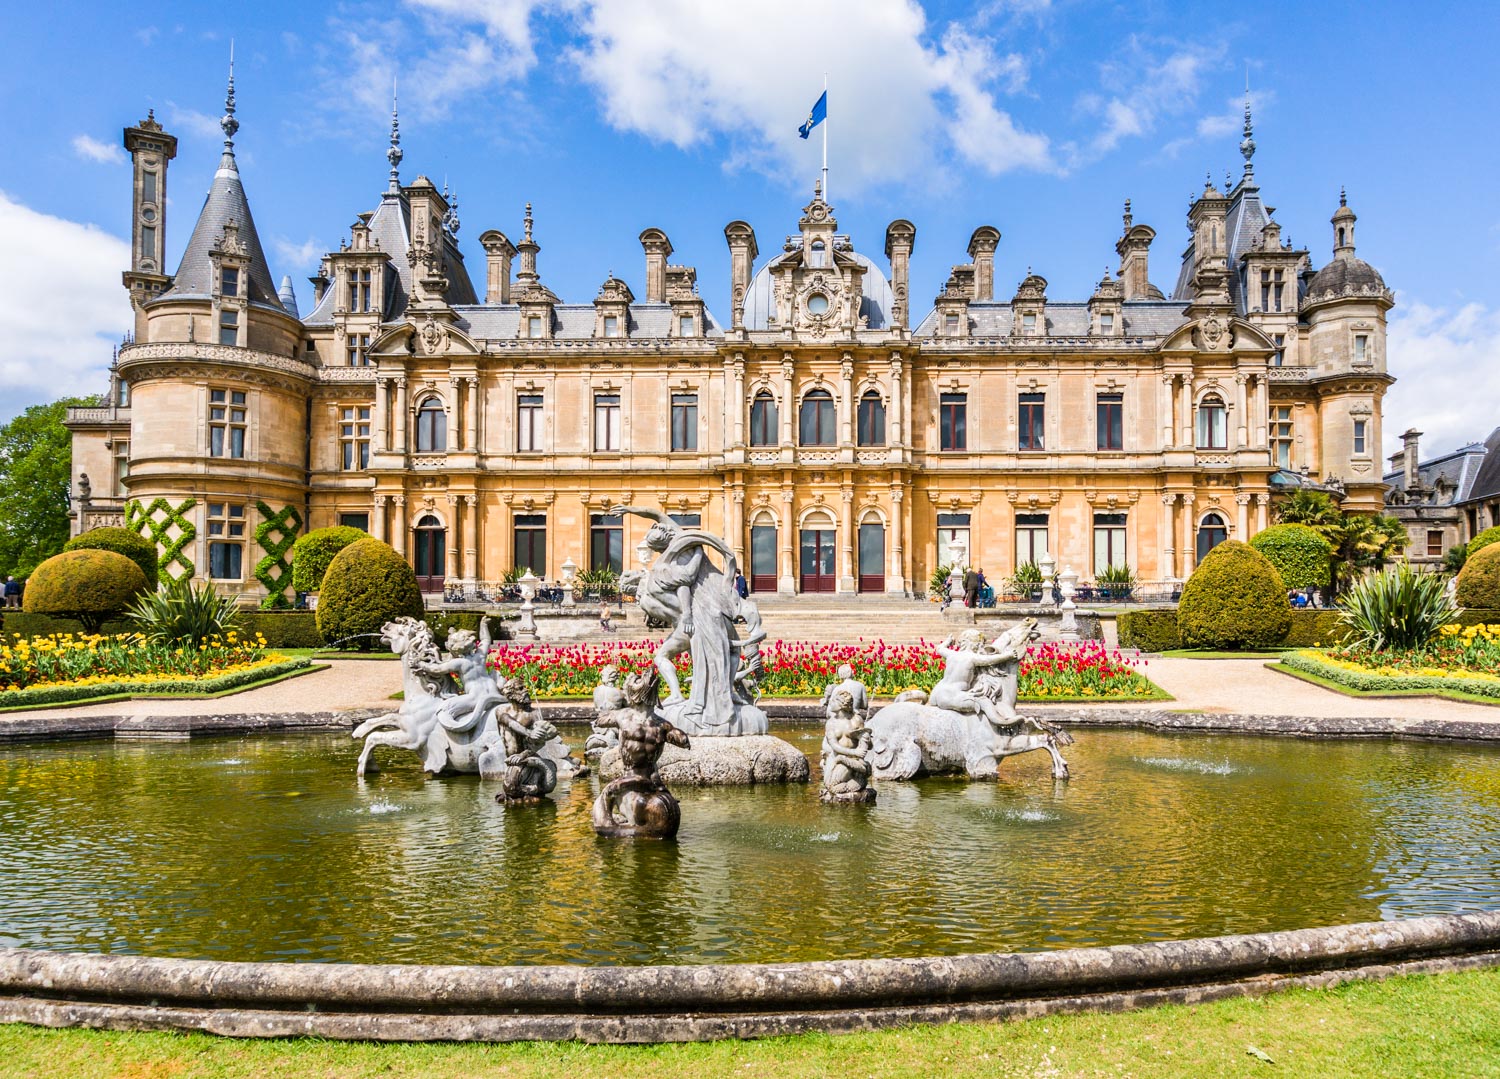 Day trip to Waddesdon Manor (a Spring revisit!)